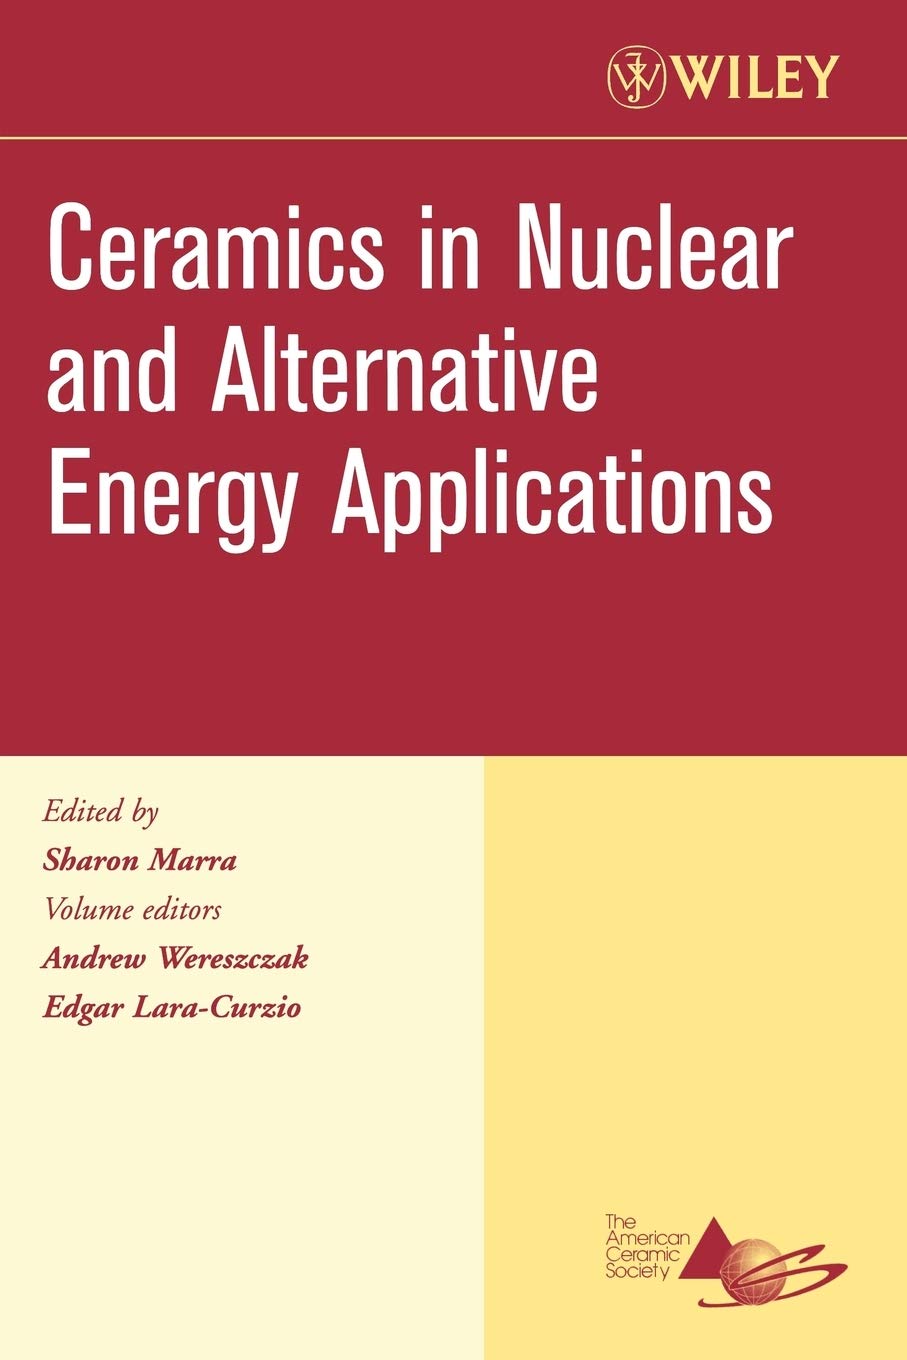 Ceramics in Nuclear and Alternative Energy Applications, Volume 27, Issue 5 (Ceramic Engineering and Science Proceedings)